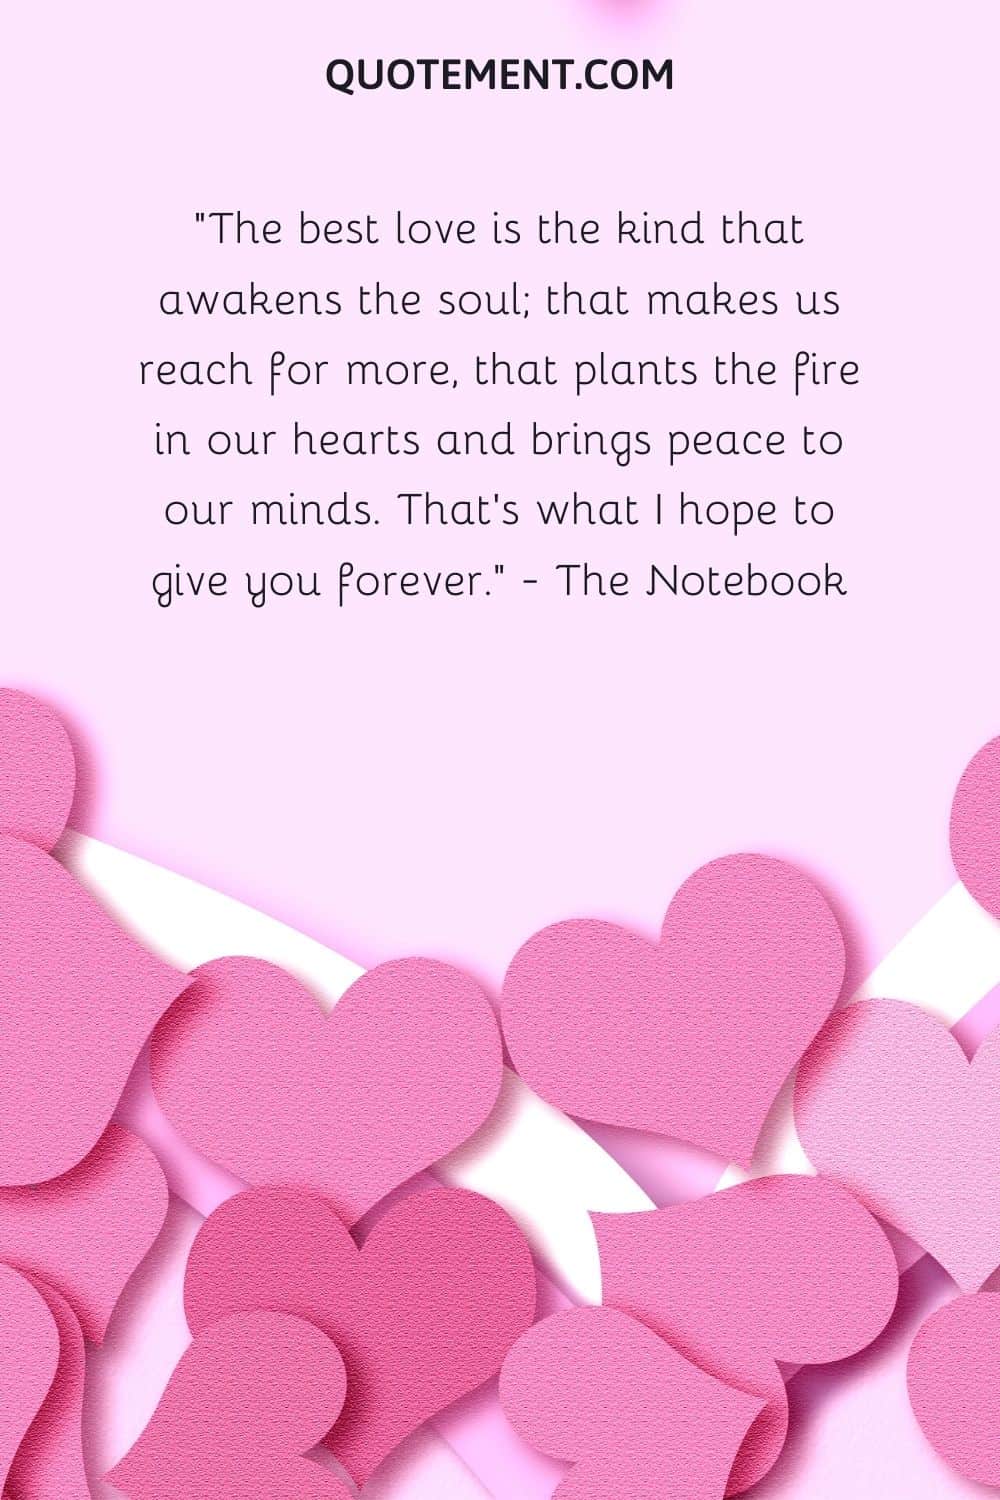 The best love is the kind that awakens the soul; that makes us reach for more, that plants the fire in our hearts and brings peace to our minds. That’s what I hope to give you forever.” — The Notebook